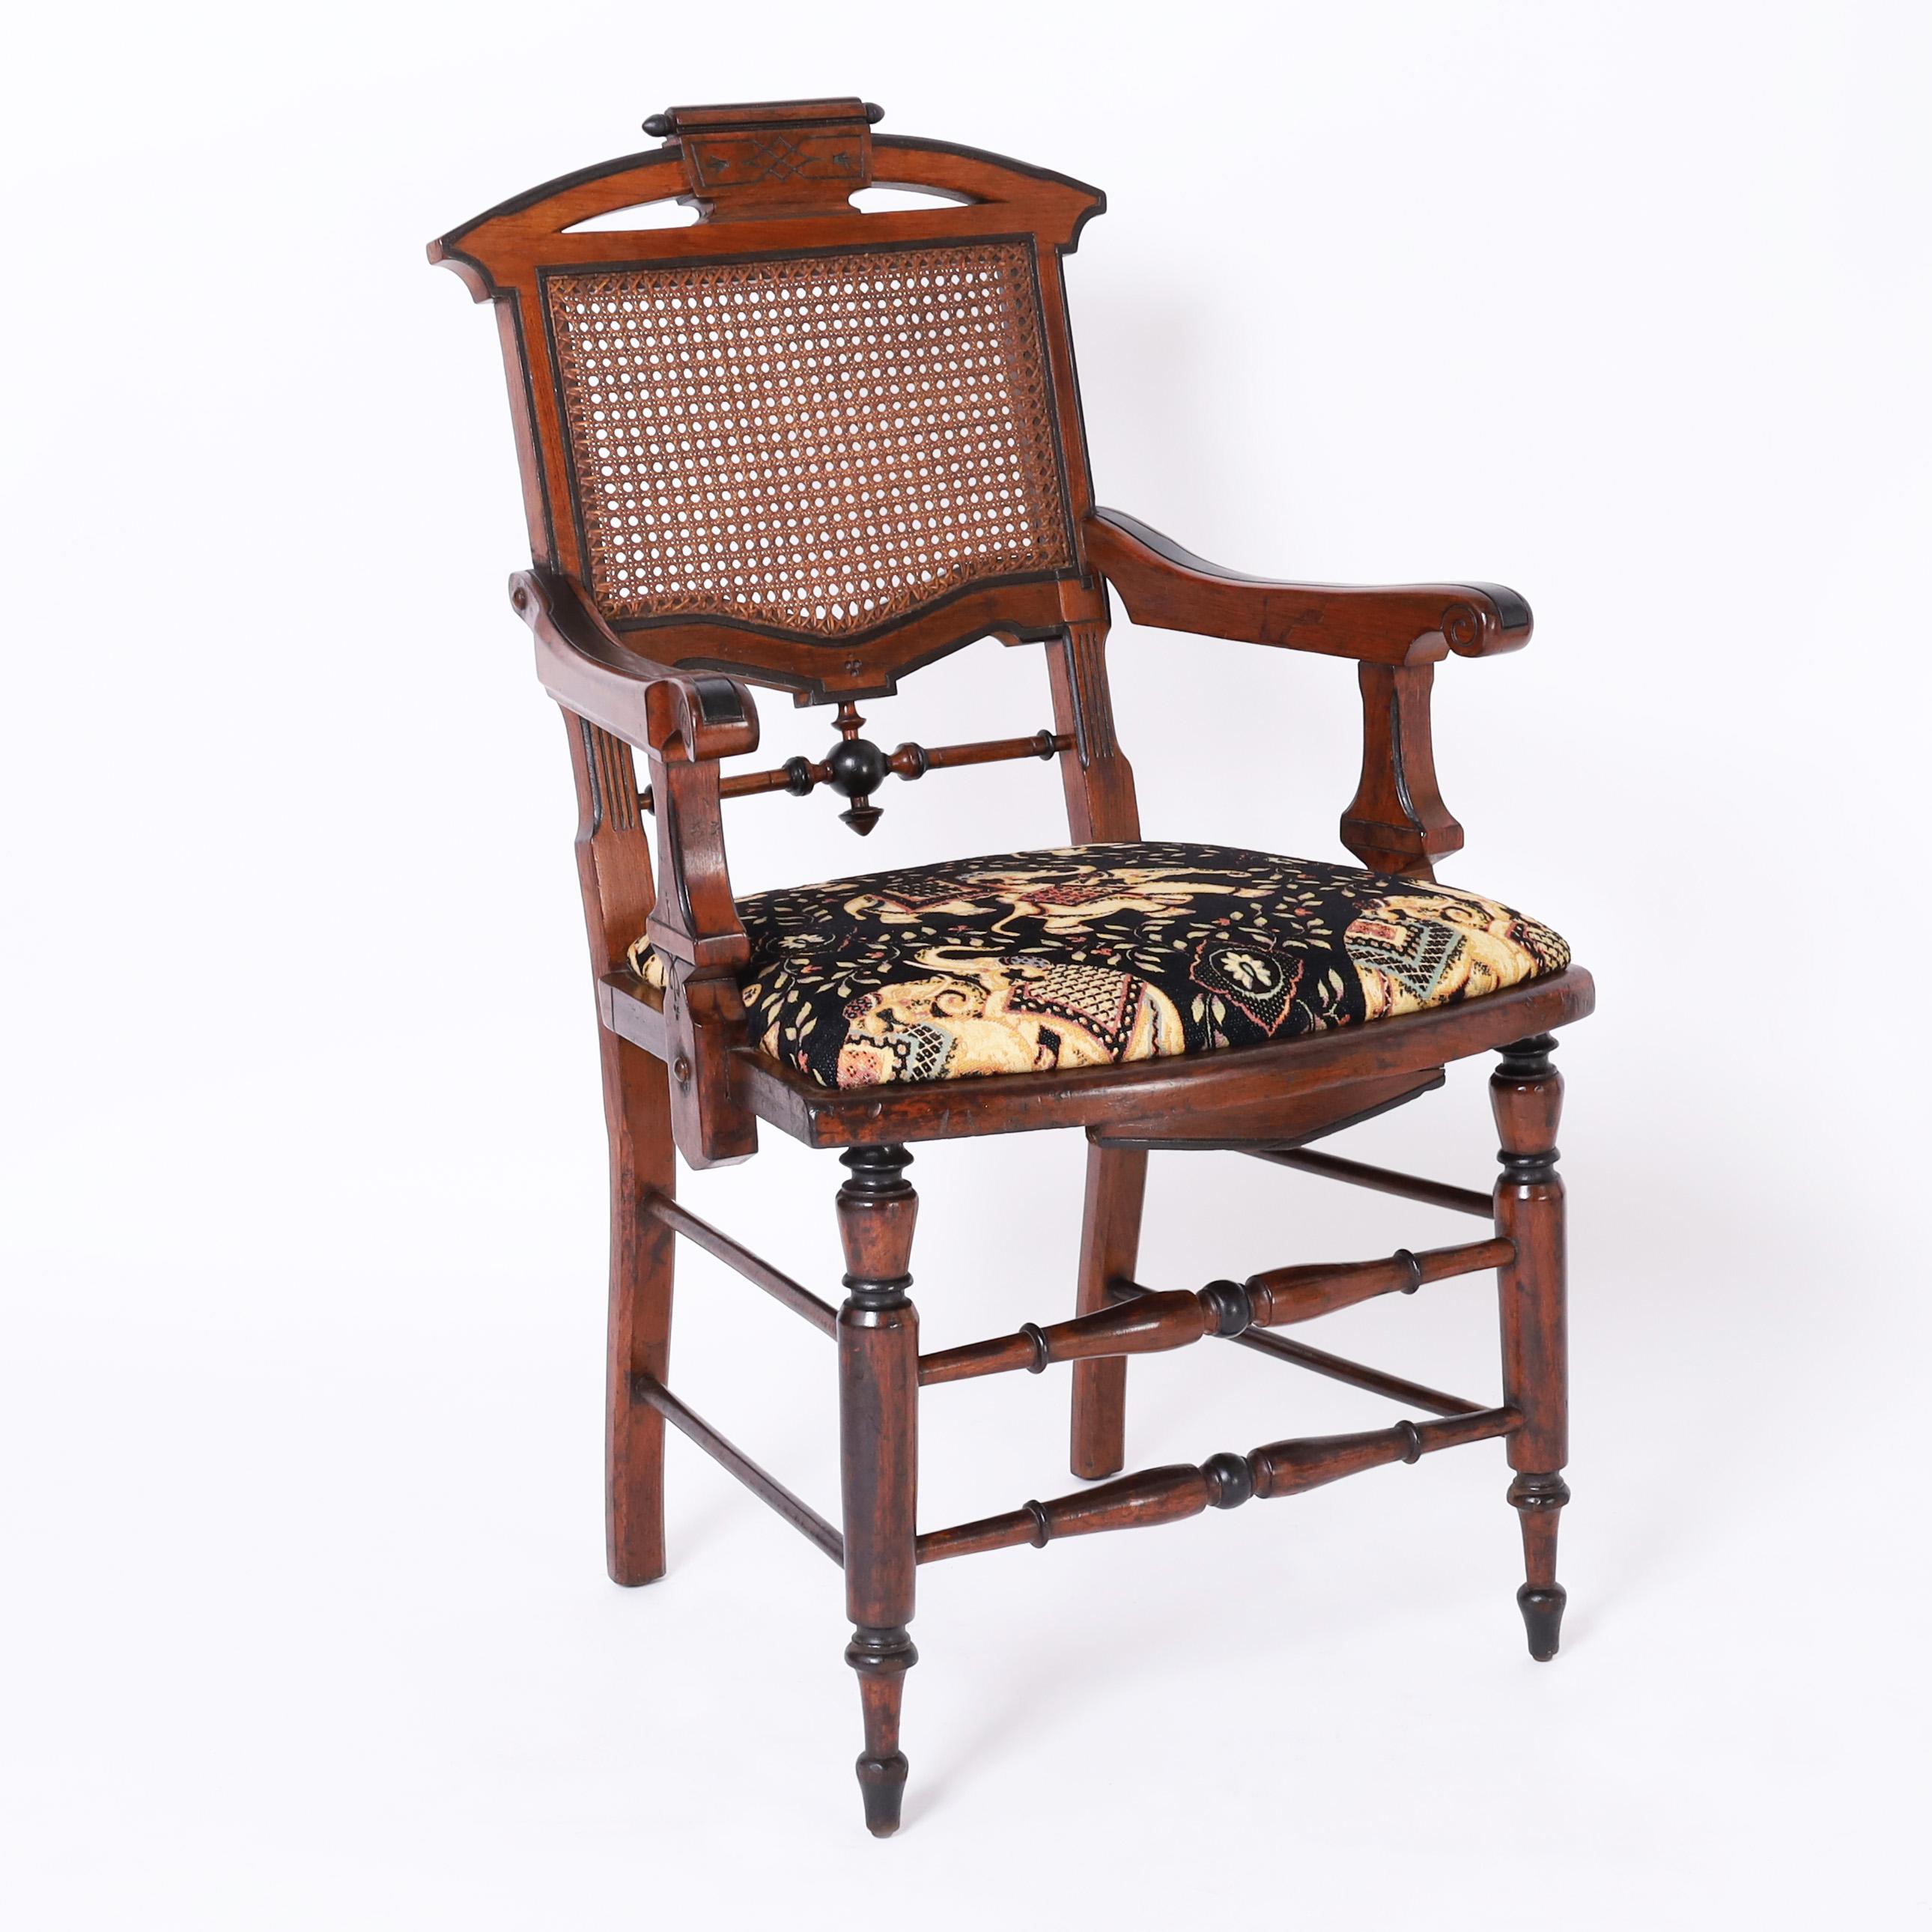 Rare and remarkable set of eight 19th century English dining chairs having two armchairs and six sides crafted in mahogany with ebonized highlights featuring eastlake style crests, caned backs, aesthetic movement stick and ball and turned legs and